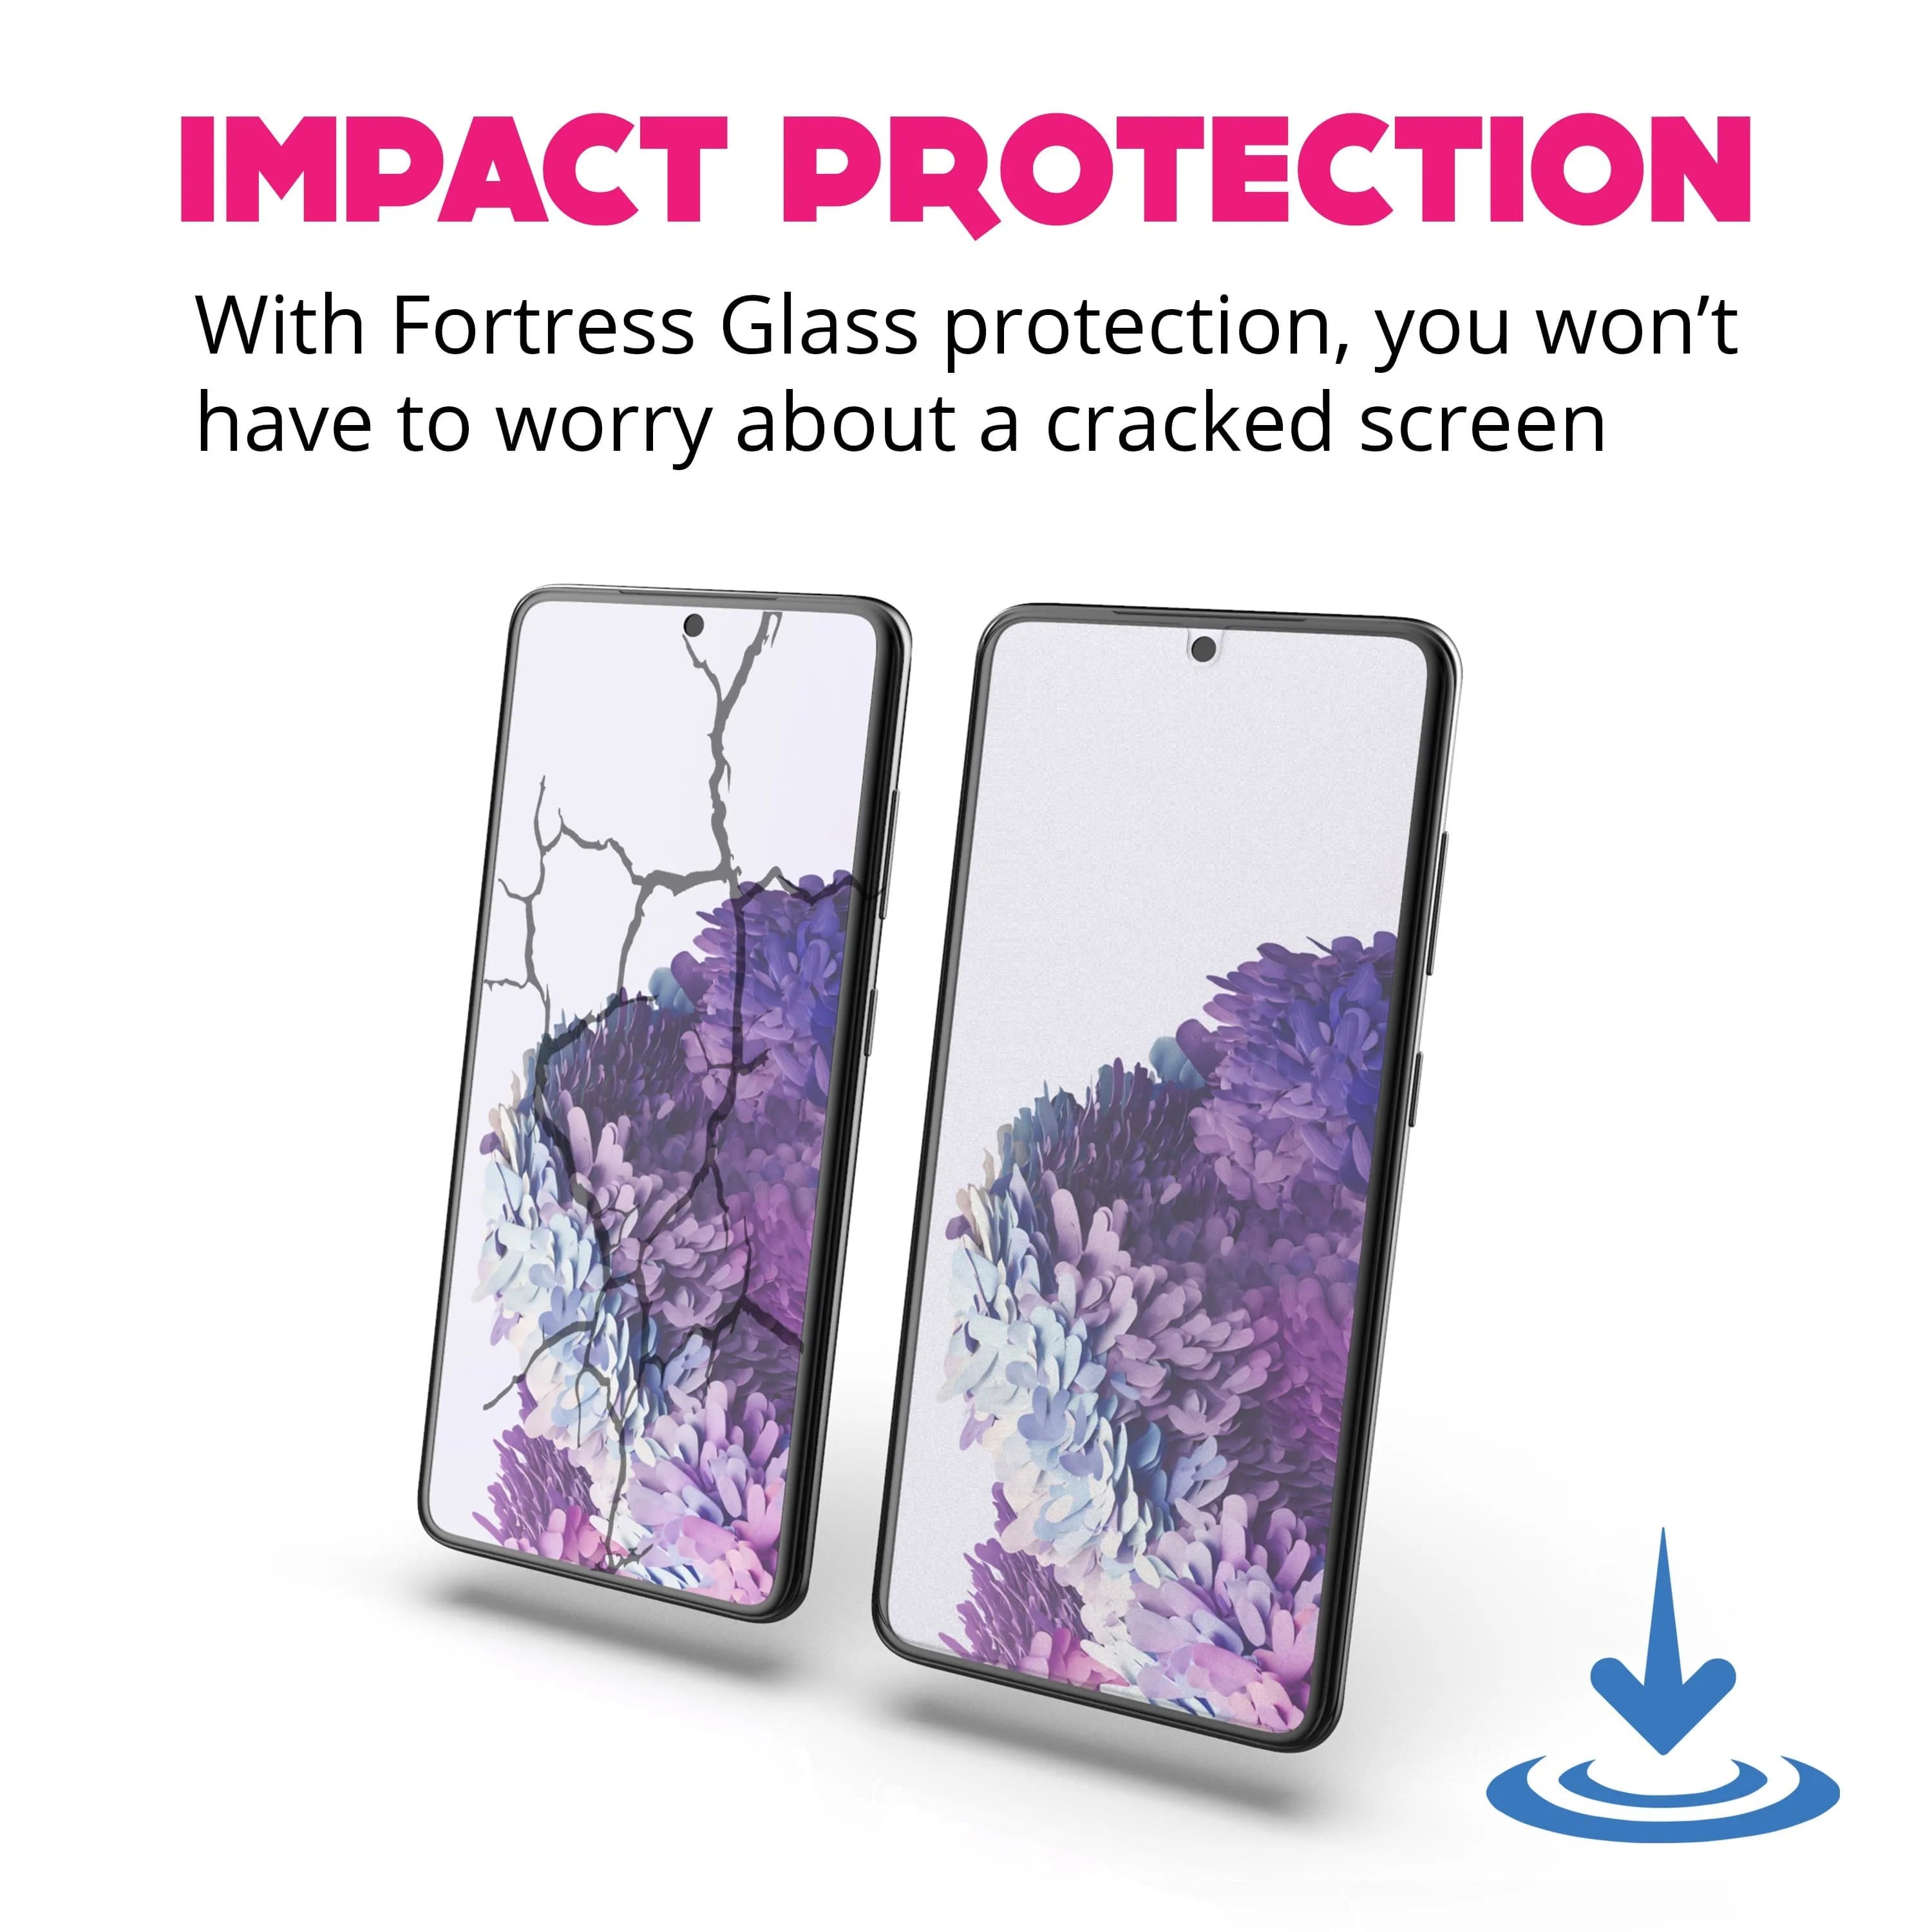 Fortress Samsung Galaxy S20 Ultra Screen Protector - $200 Device Coverage  Scooch Screen Protector